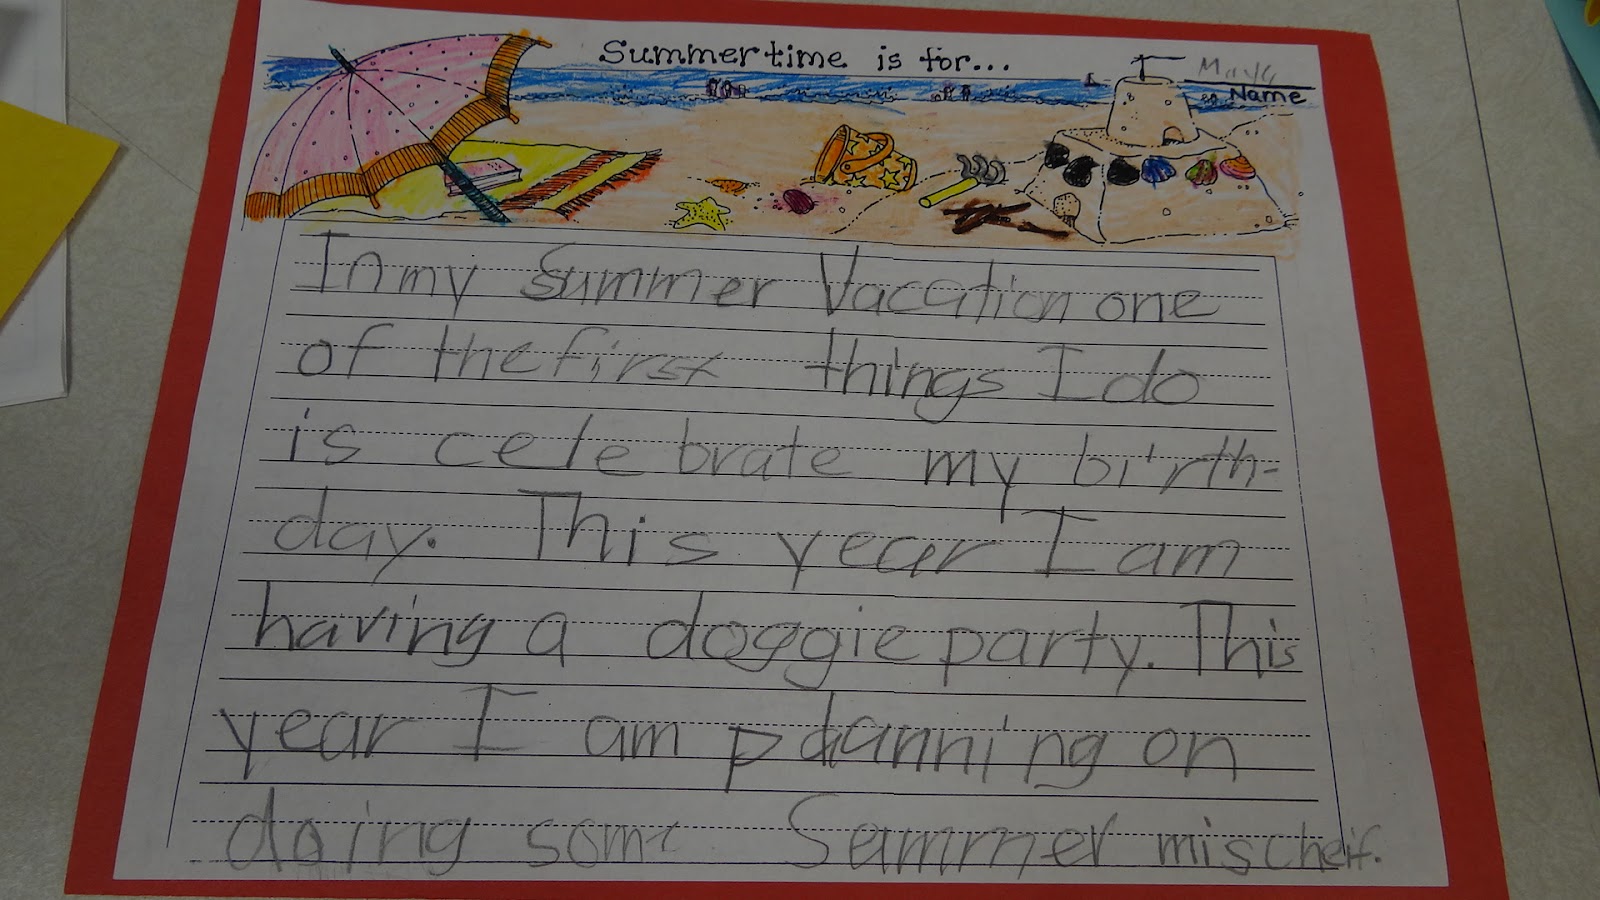 Essay on how i spent my summer vacation for kids